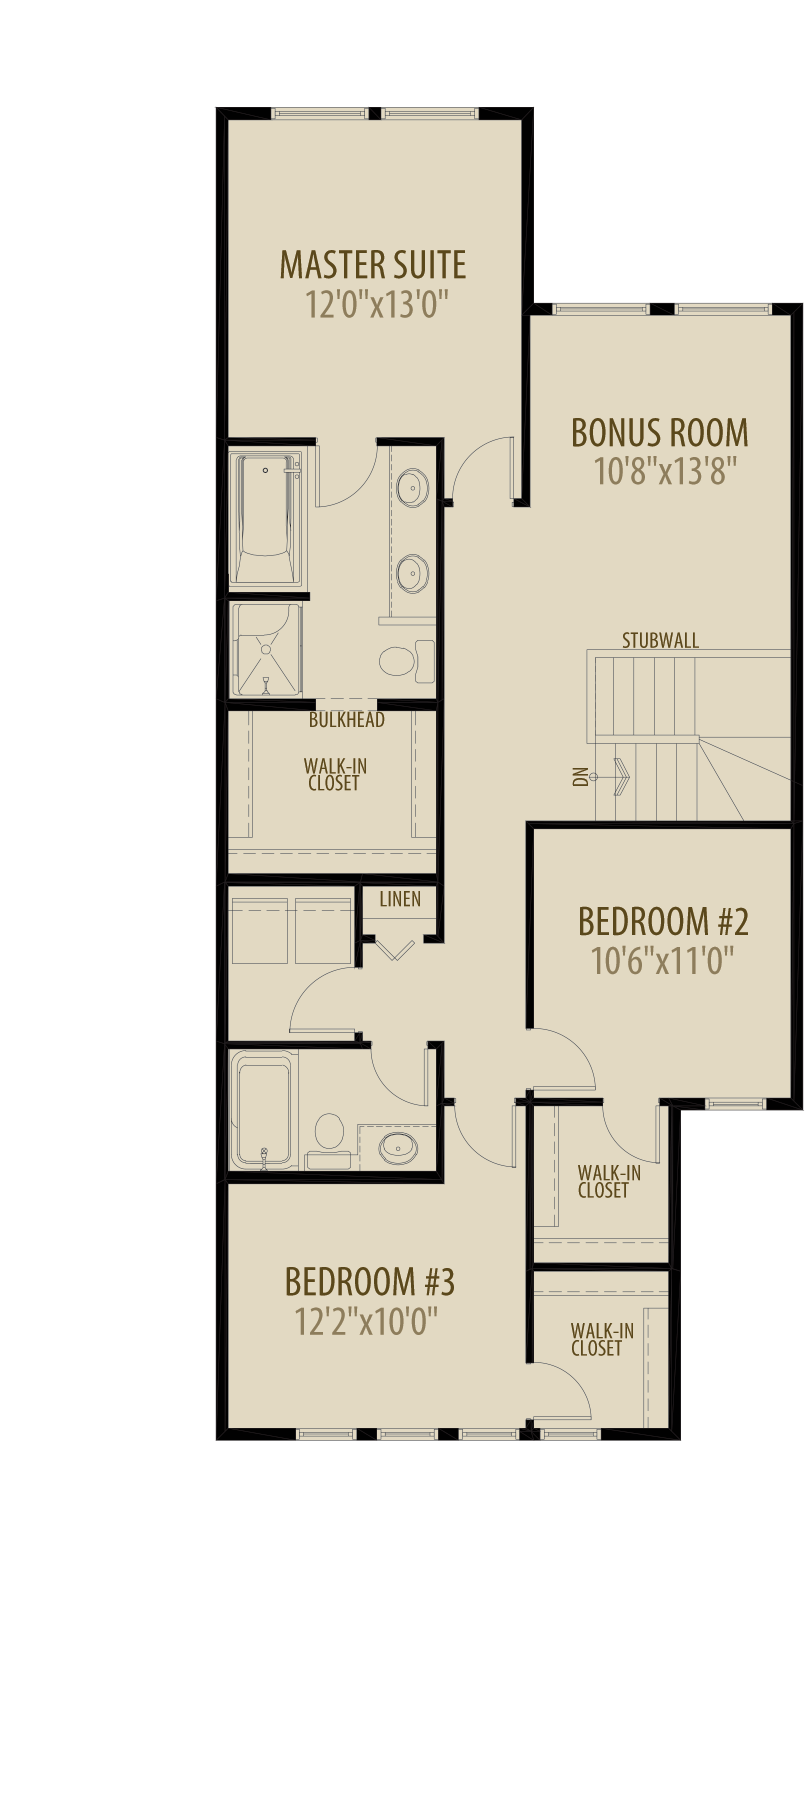 Expanded Bedroom Adds 46 sq ft